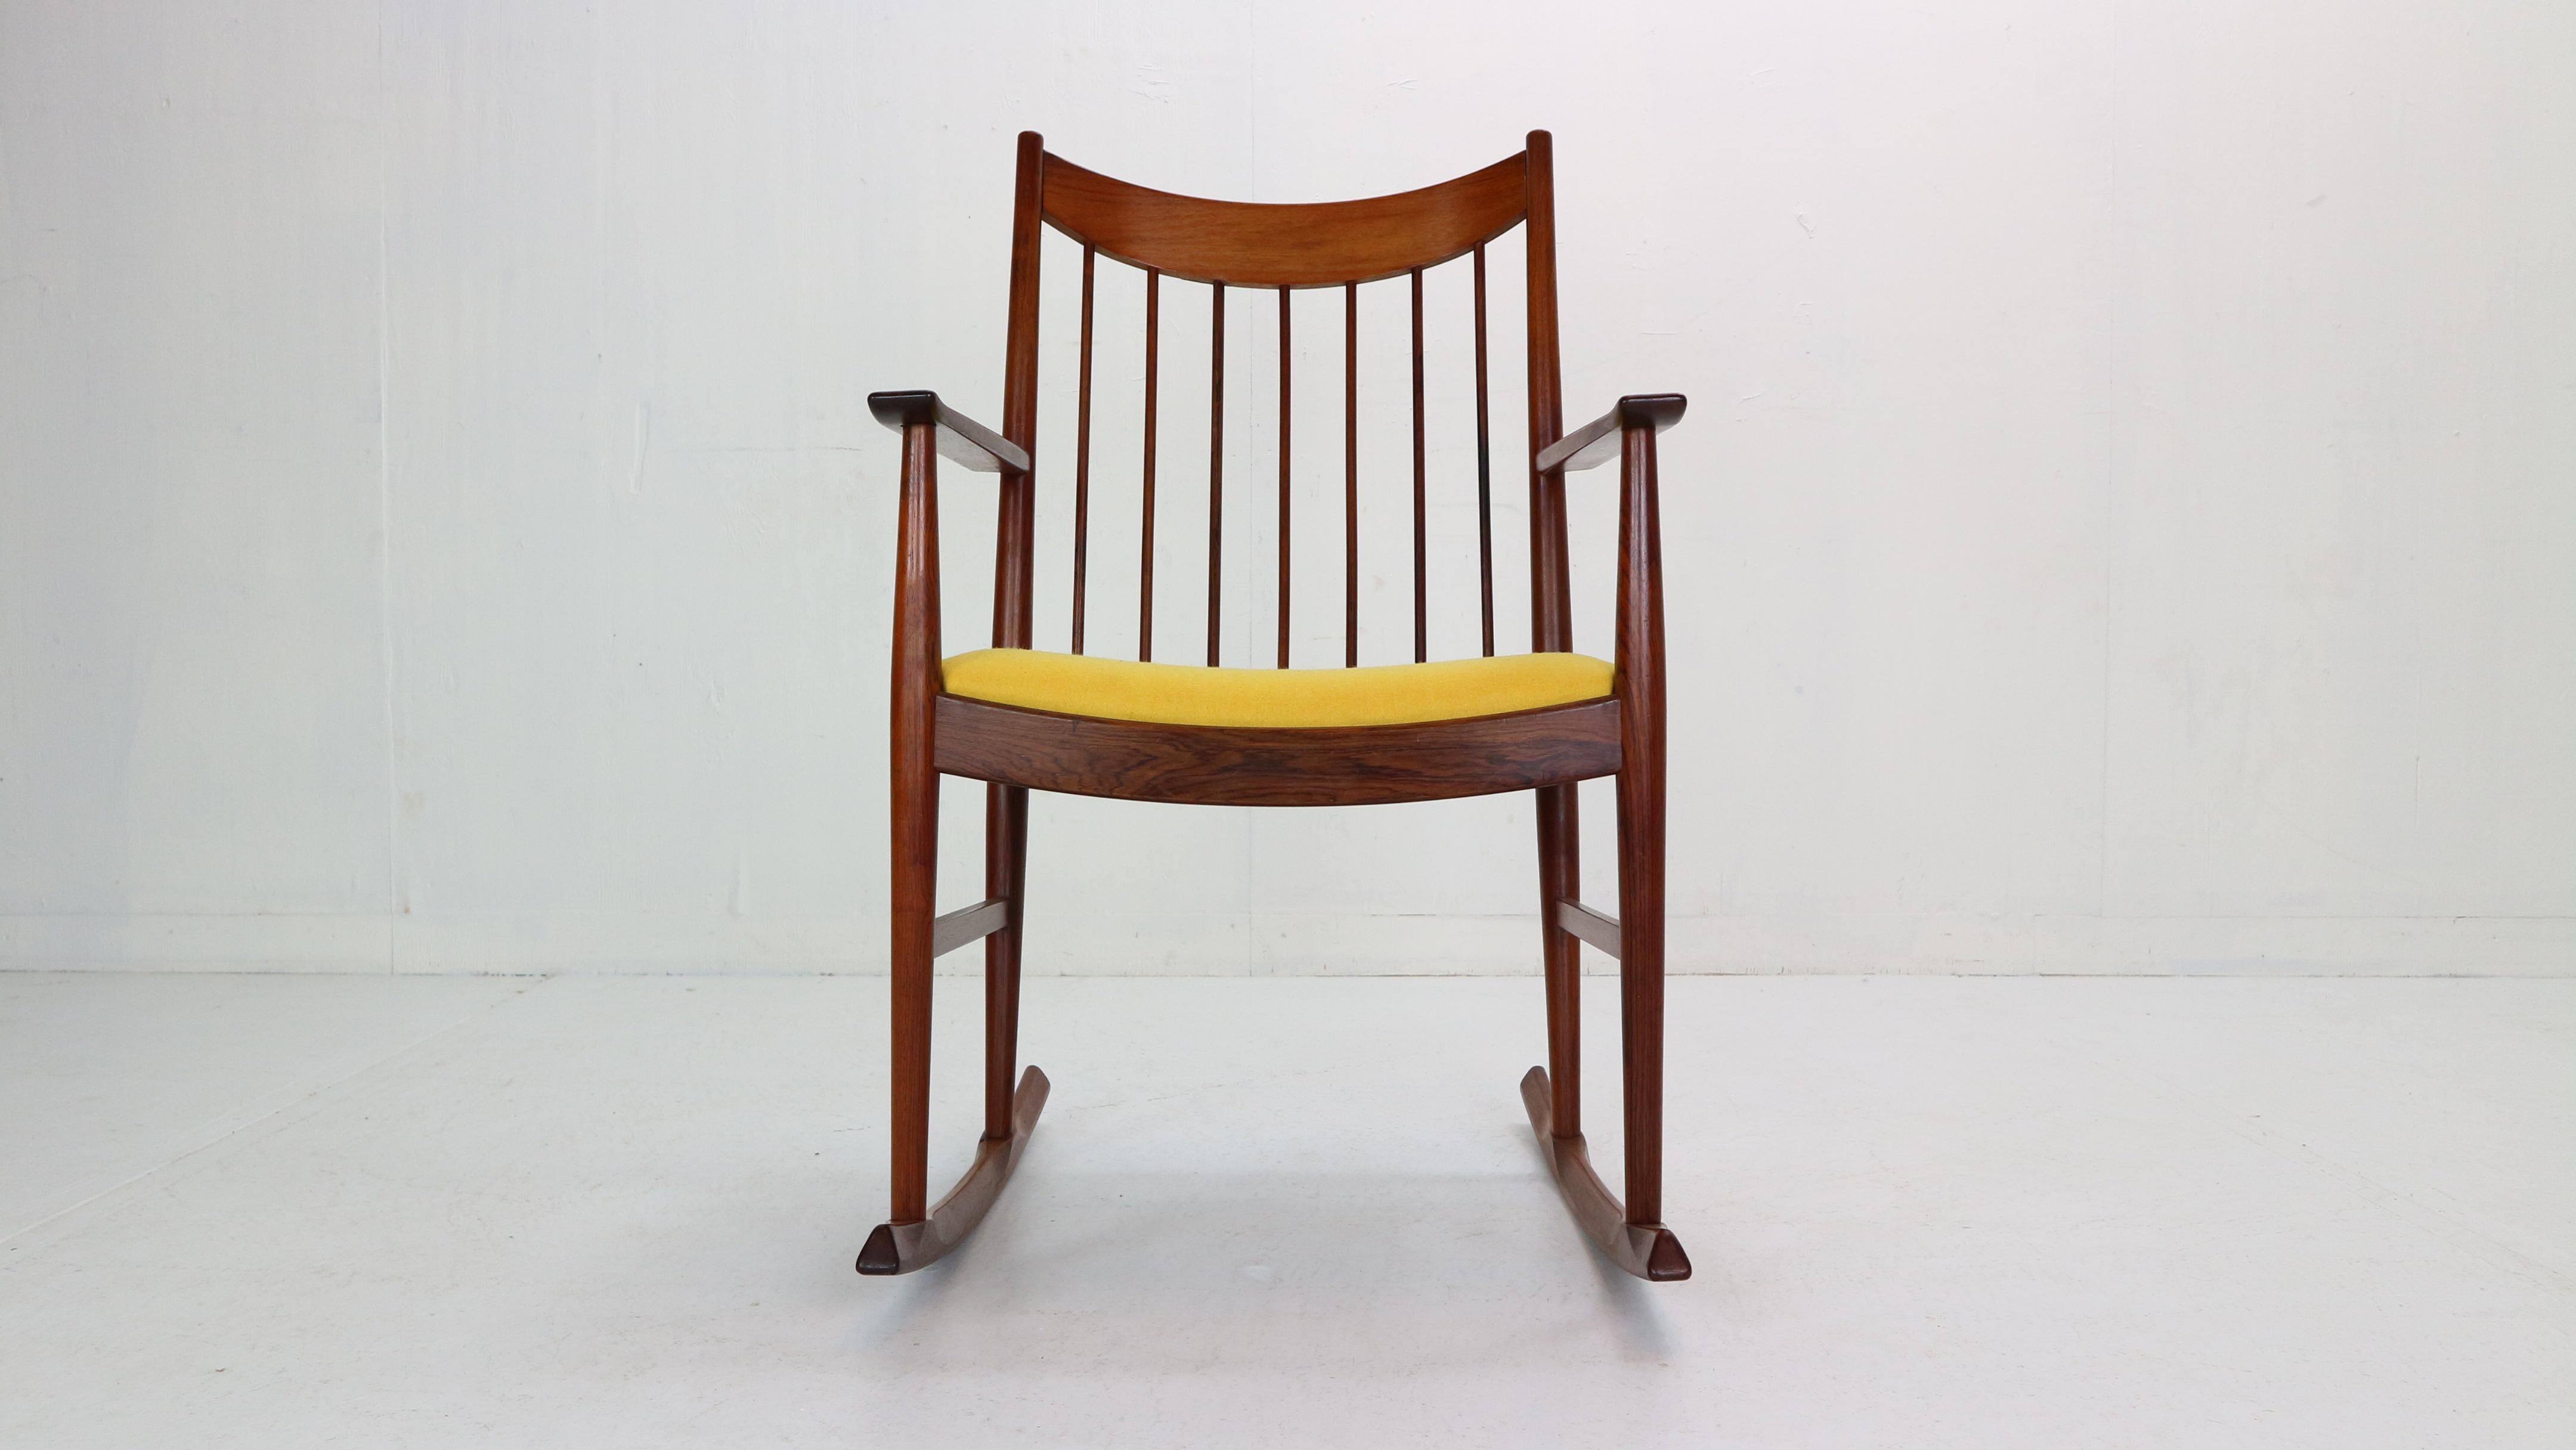 Scandinavian Modern period rocking chair designed by Arne Vodder for Danish furniture manufacture Sibast in 1960s period.

The chair is composed from solid rosewood with curved spindle back rest.
The cushion of the seating has been newly